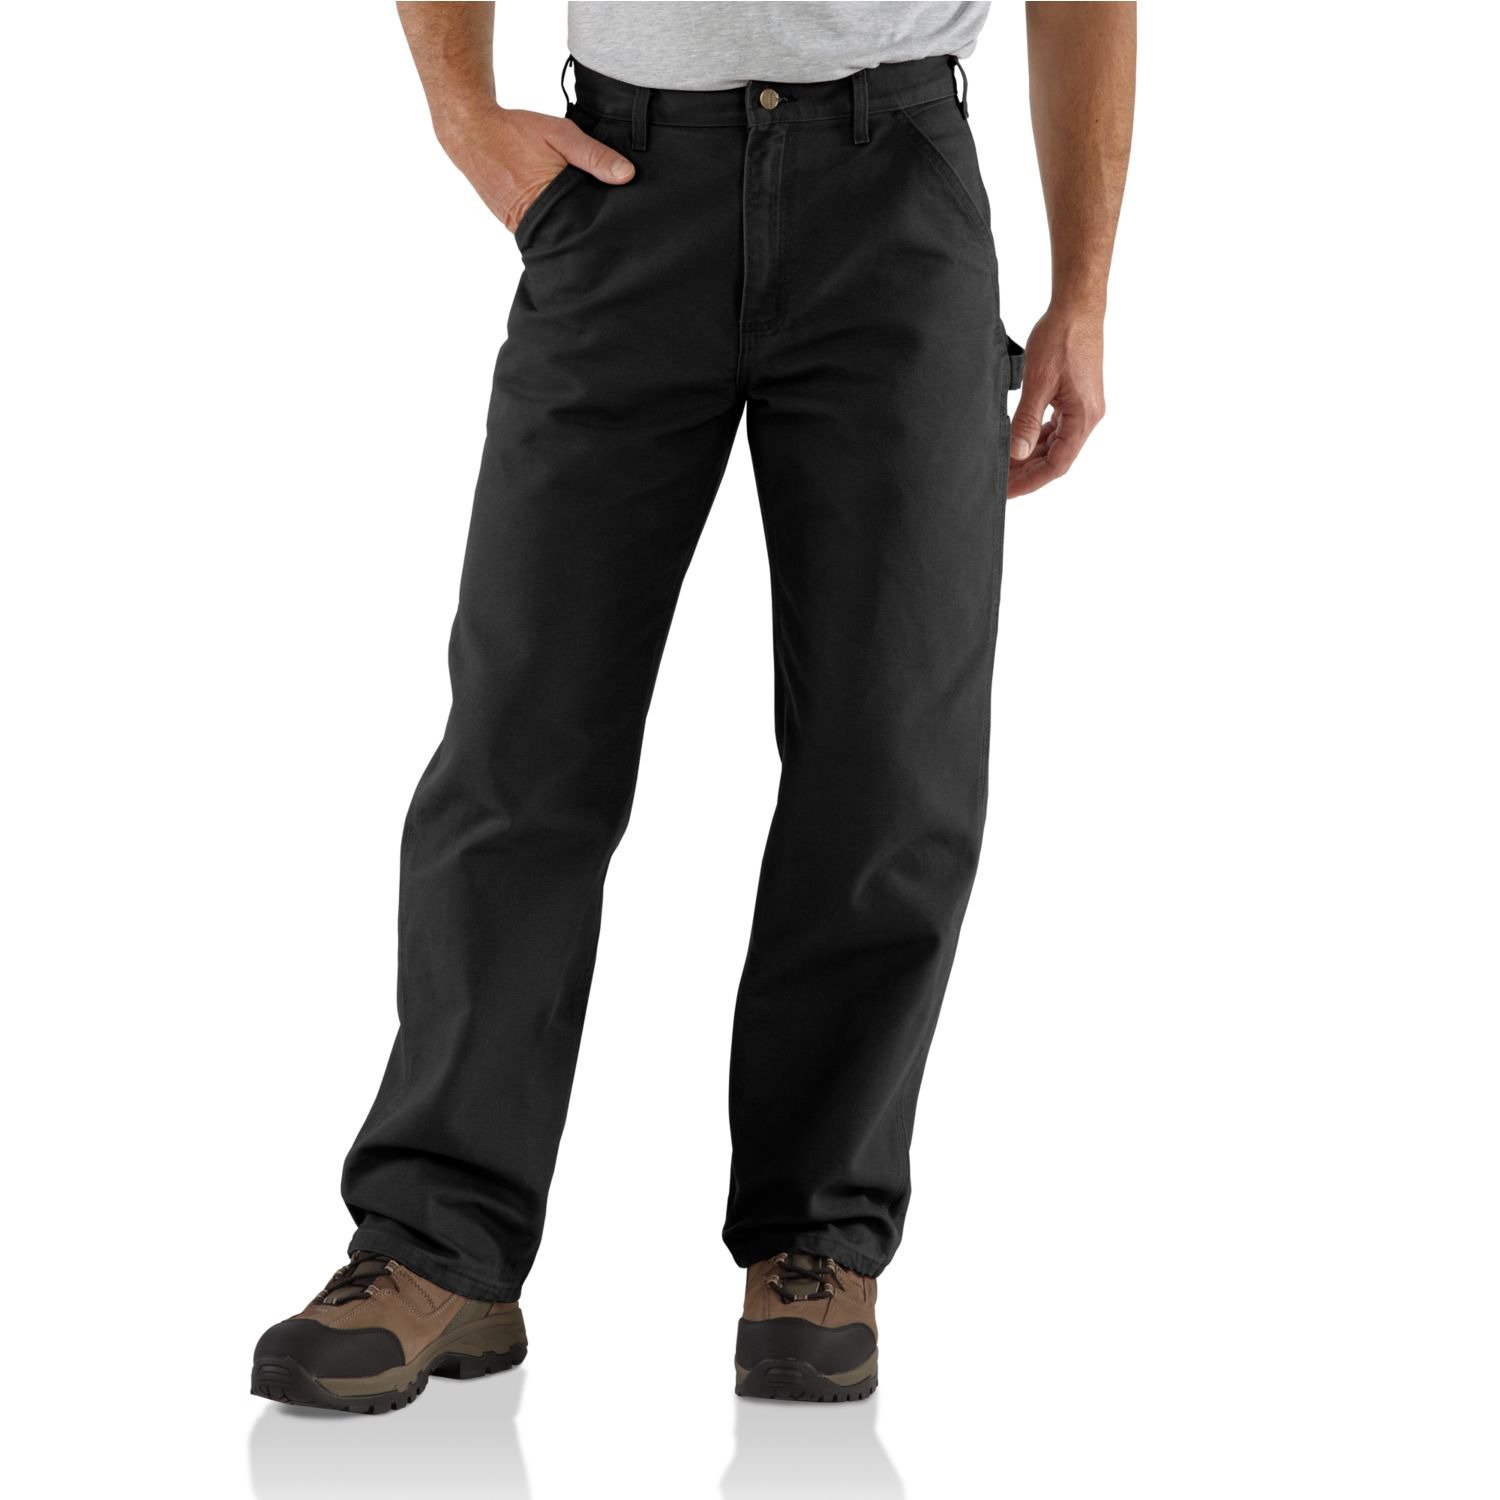 Carhartt Men's Relaxed Fit Jean | Free Shipping at Academy